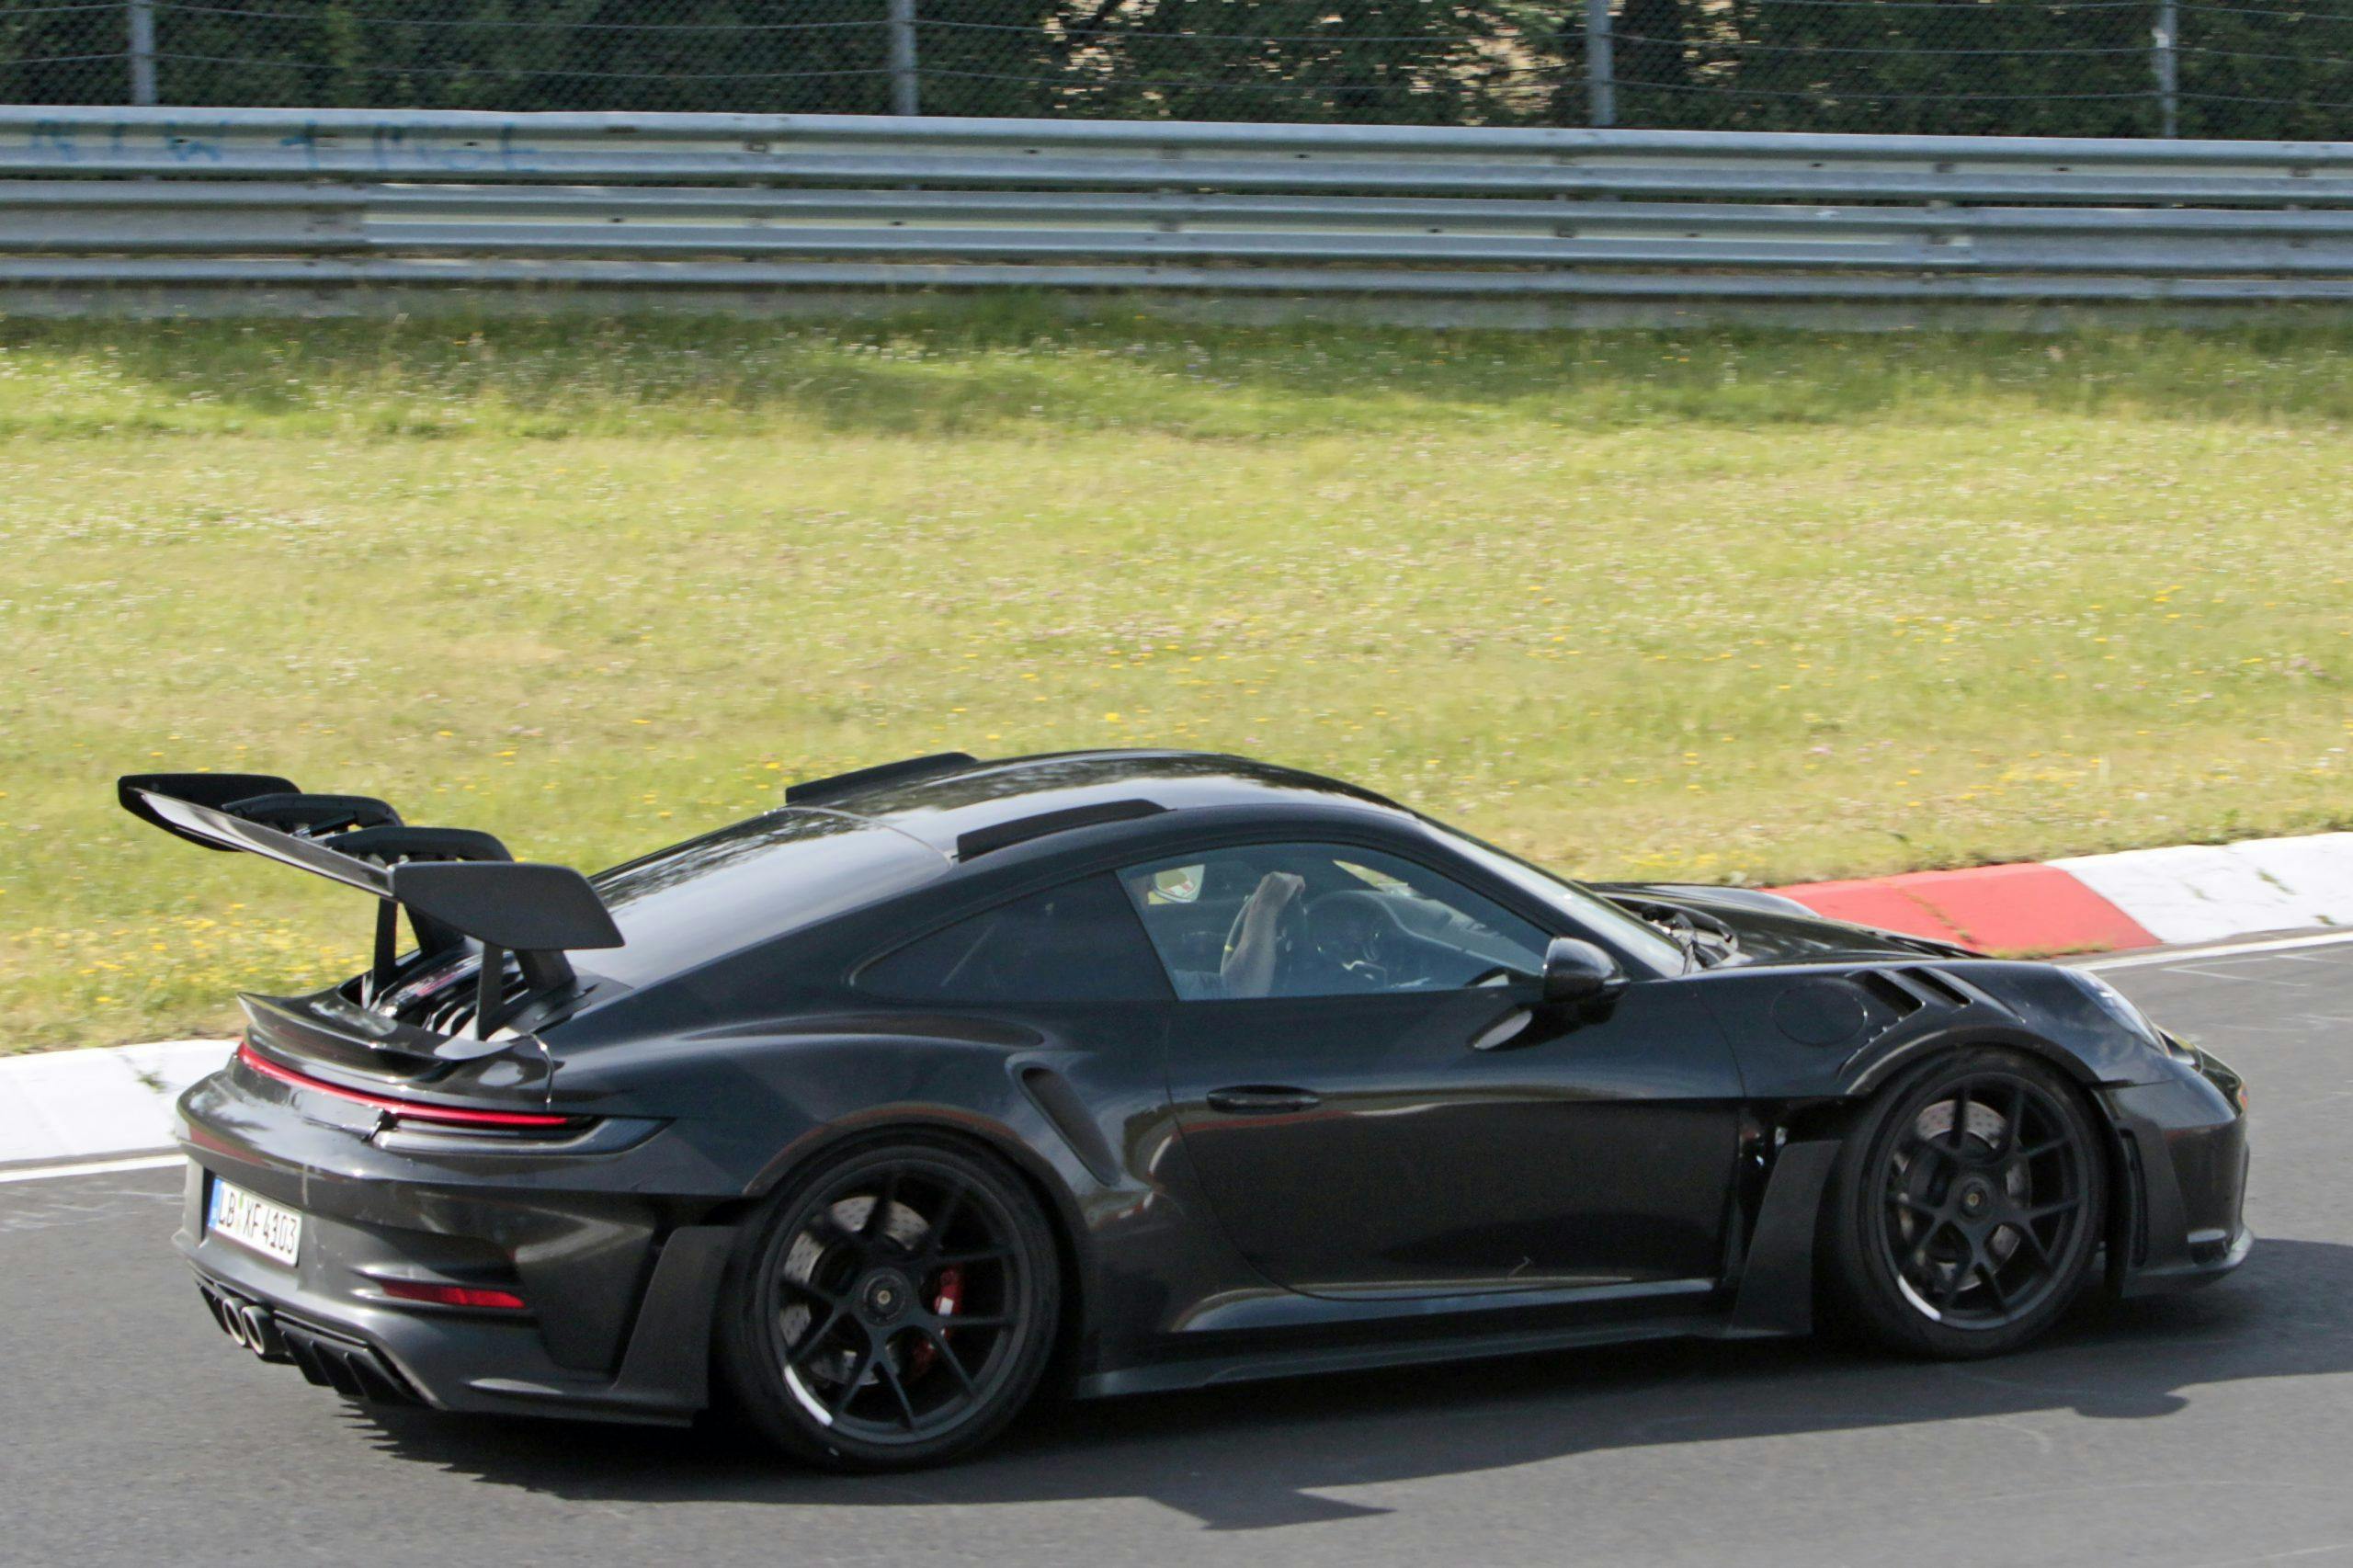 Porsche 911 GT3 RS Spy Shots exterior close-up rear and side